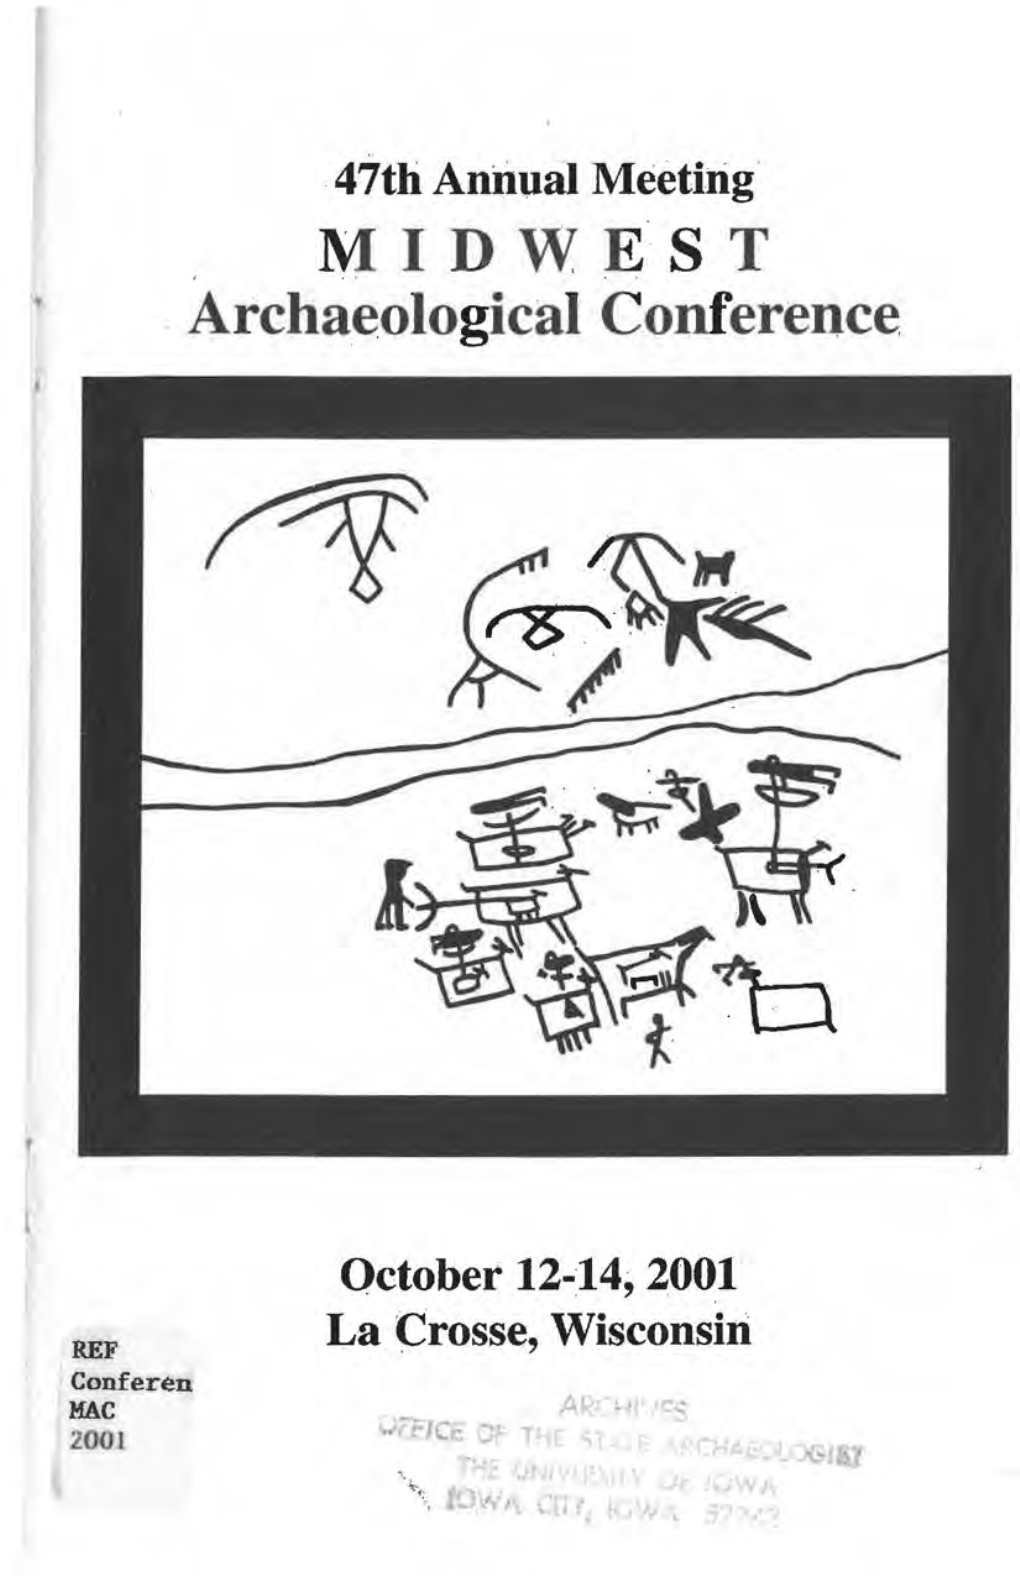 2001 Midwest Archaeological Conference Program